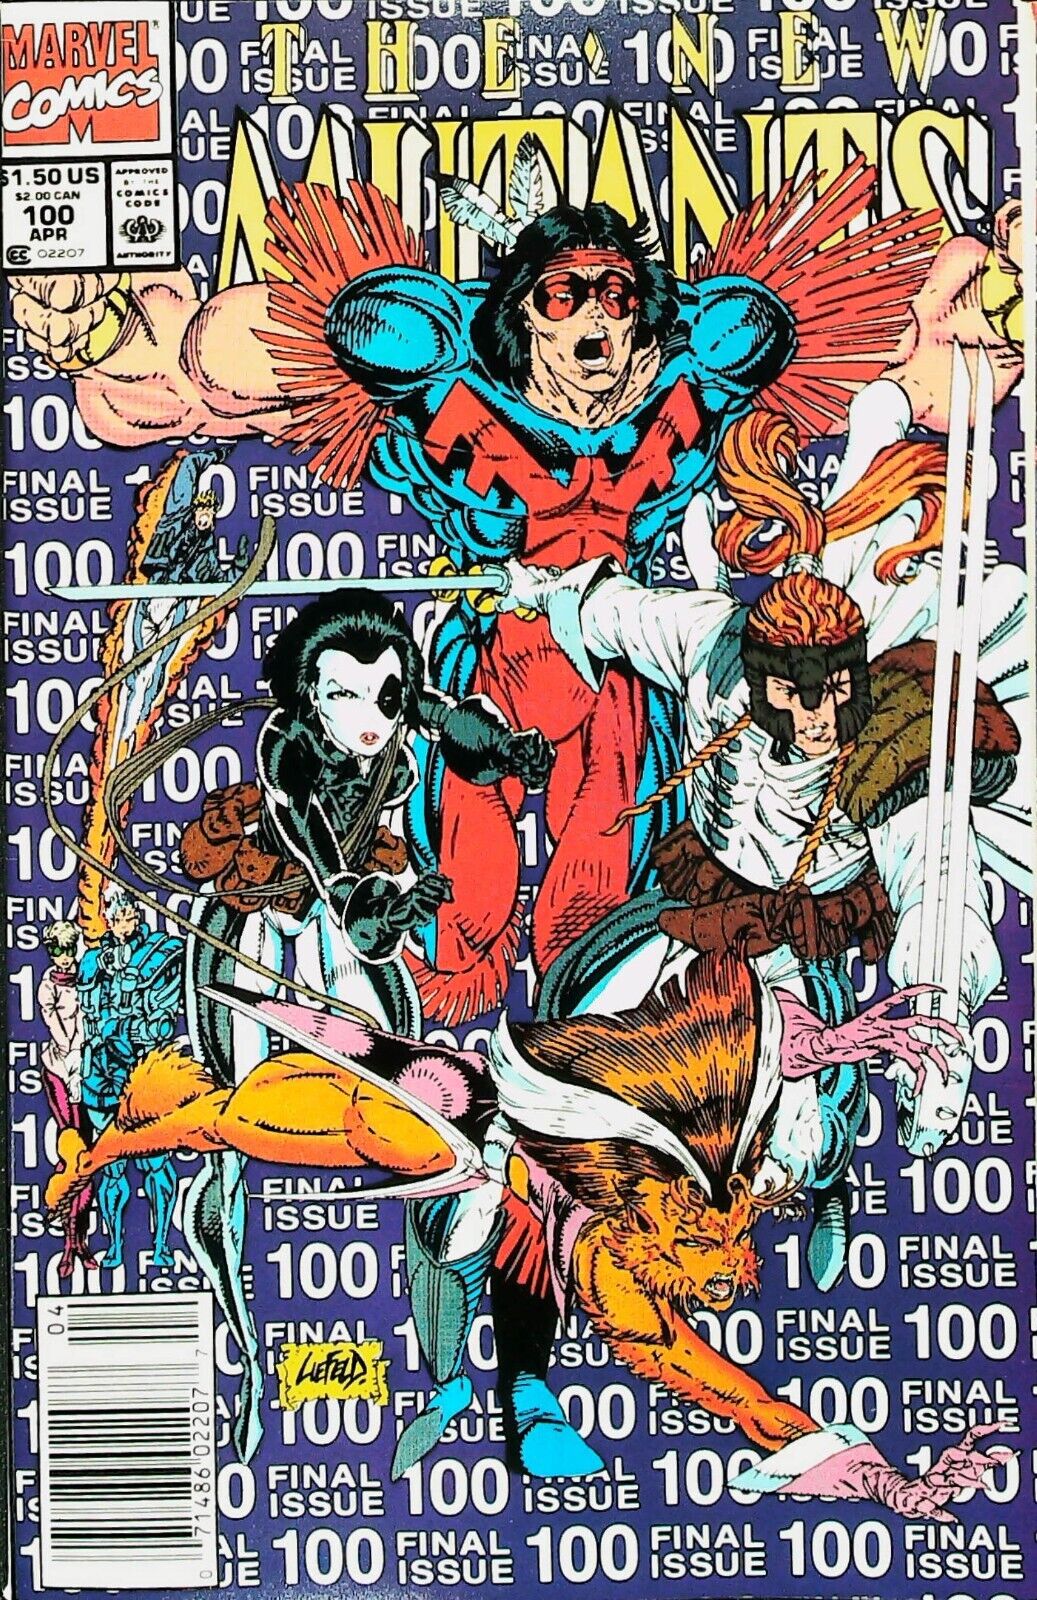 The New Mutants #100 Vol 1 (1991) KEY *Last Issue/1st App of X-Force*-High Grade